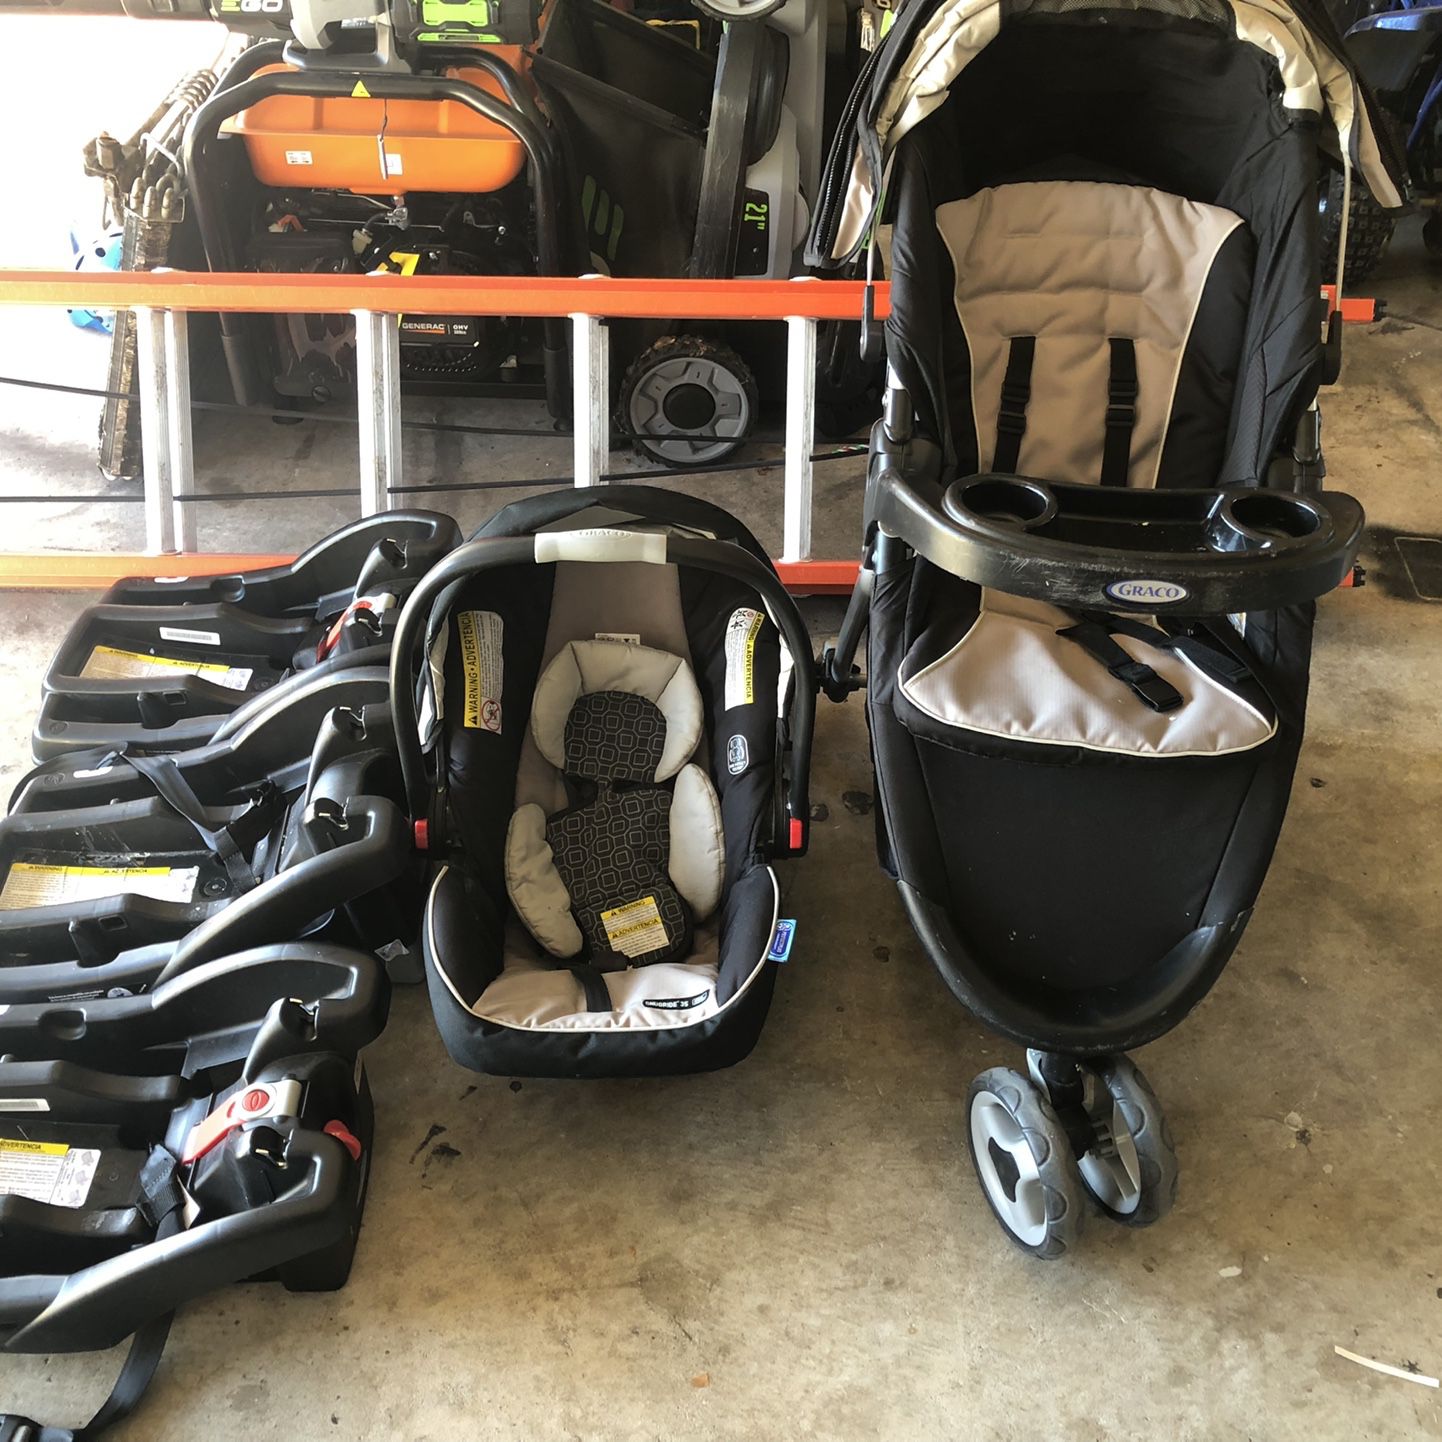 Free Louis Vuitton with 3 In 1 Baby Stroller New for Sale in Wht Settlemt,  TX - OfferUp